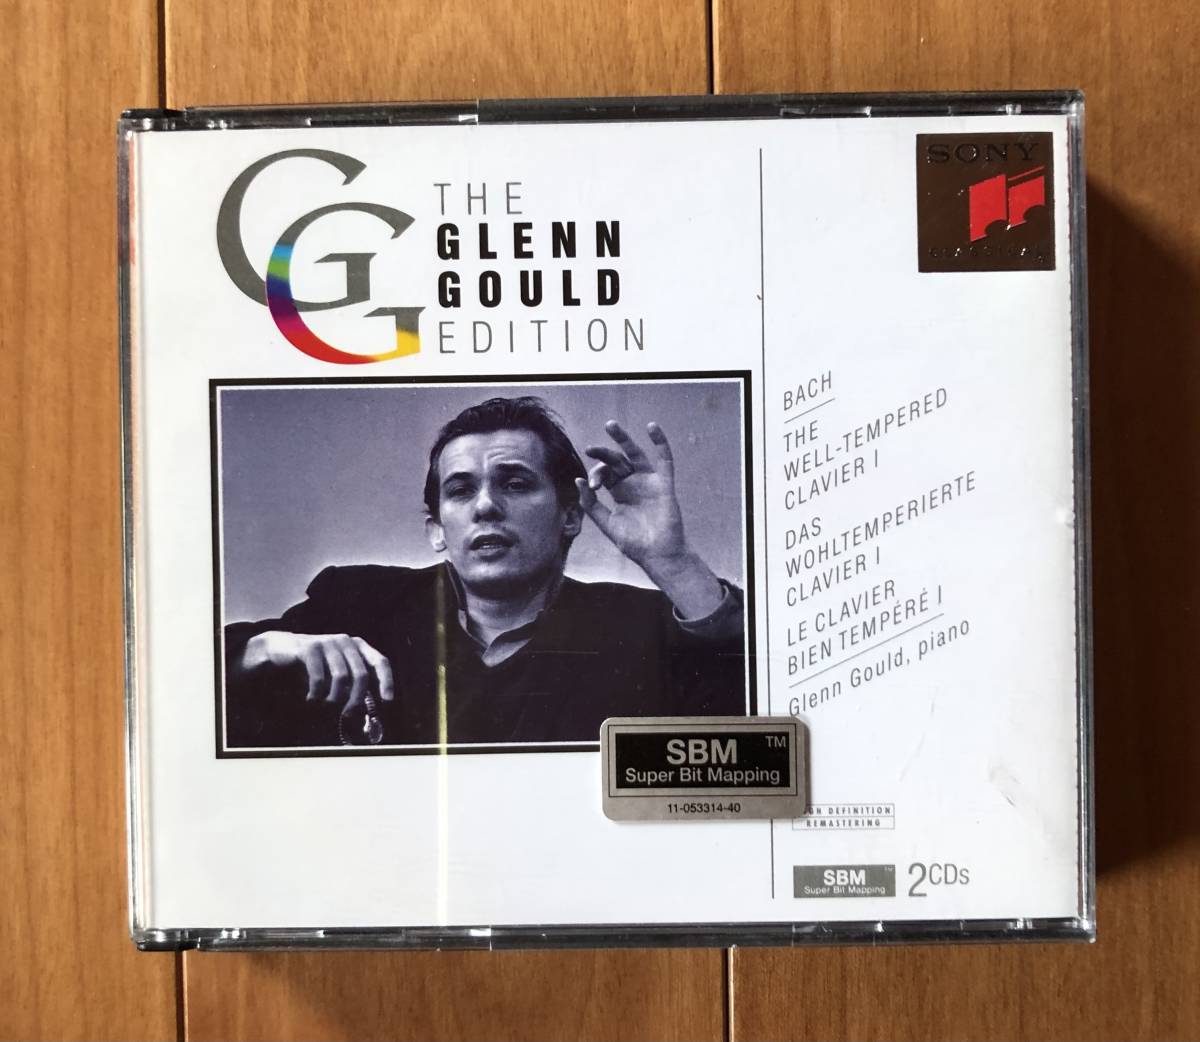 2CD-Sep / The Glenn Gould Edition / BACH_The Well-Tempered Clavier 1, Das Wohltemperierte, Le Clavier Bien Tempere １ _画像1